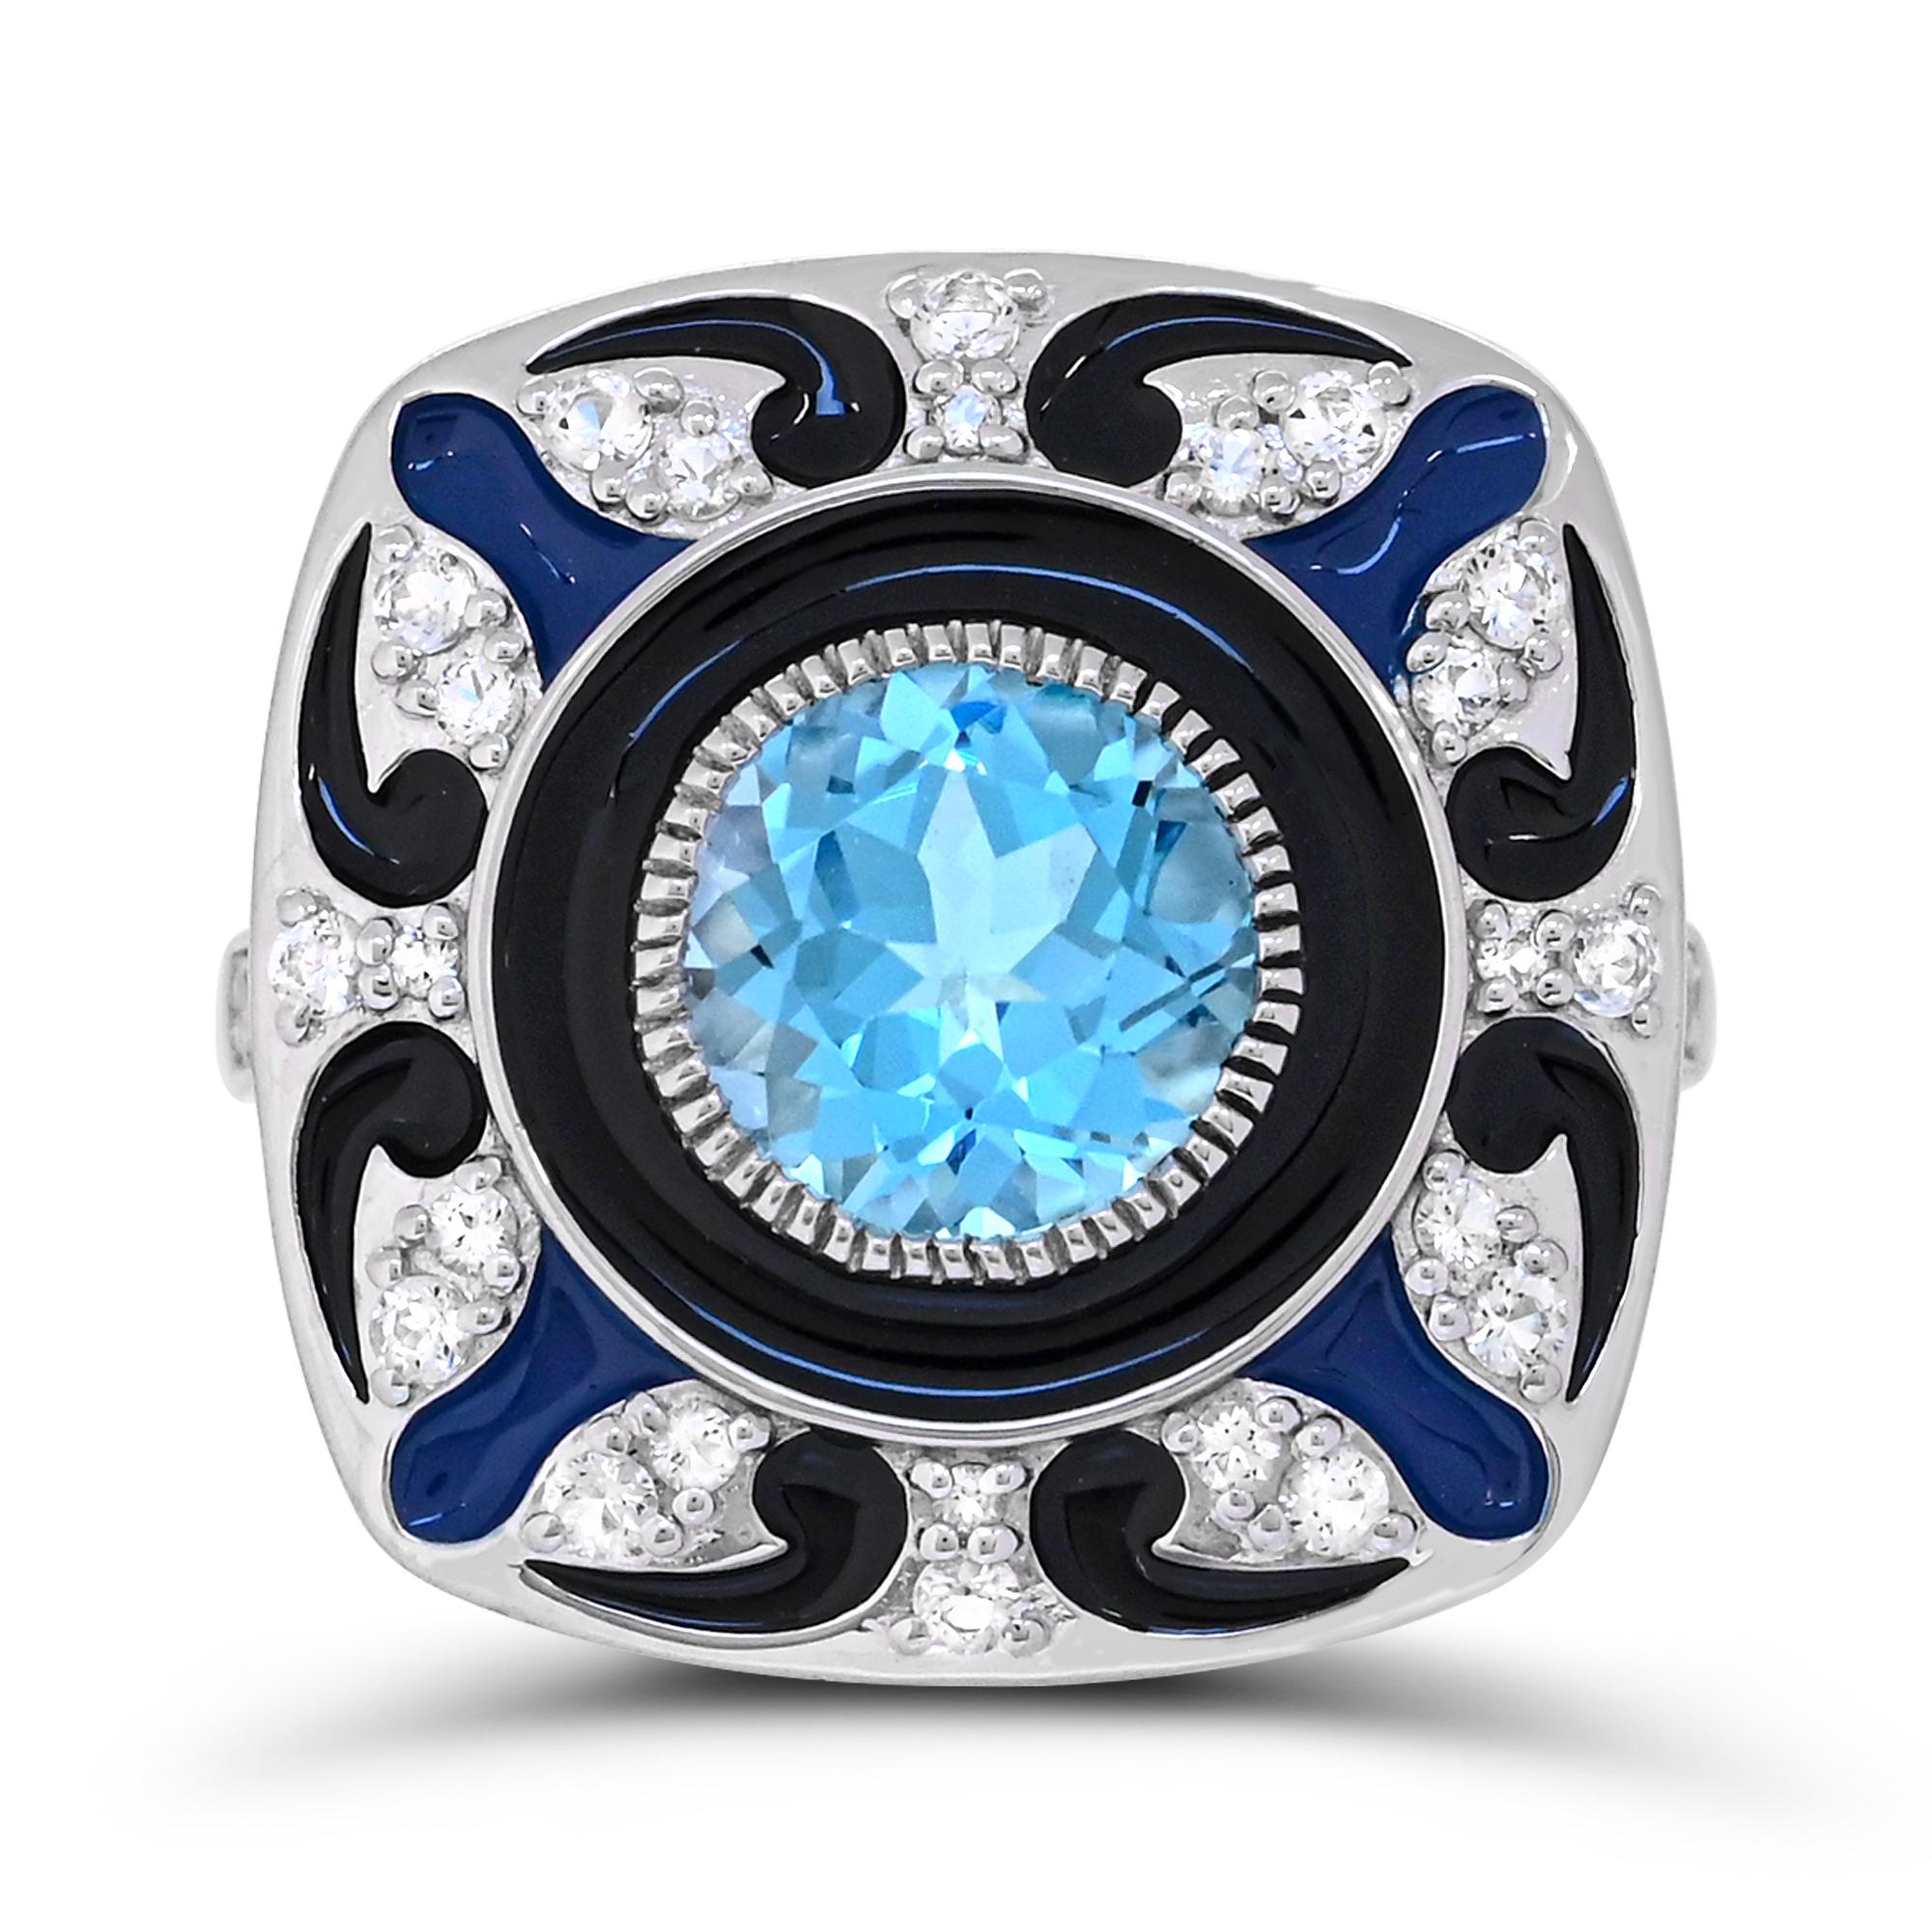 Indulge in the uniqueness of our Swiss Blue/White Topaz and Black/Blue Enamel Sterling Silver Cocktail Ring. Crafted with meticulous attention to detail, this ring boasts a stunning combination of one round Swiss blue topaz accented by sparkling